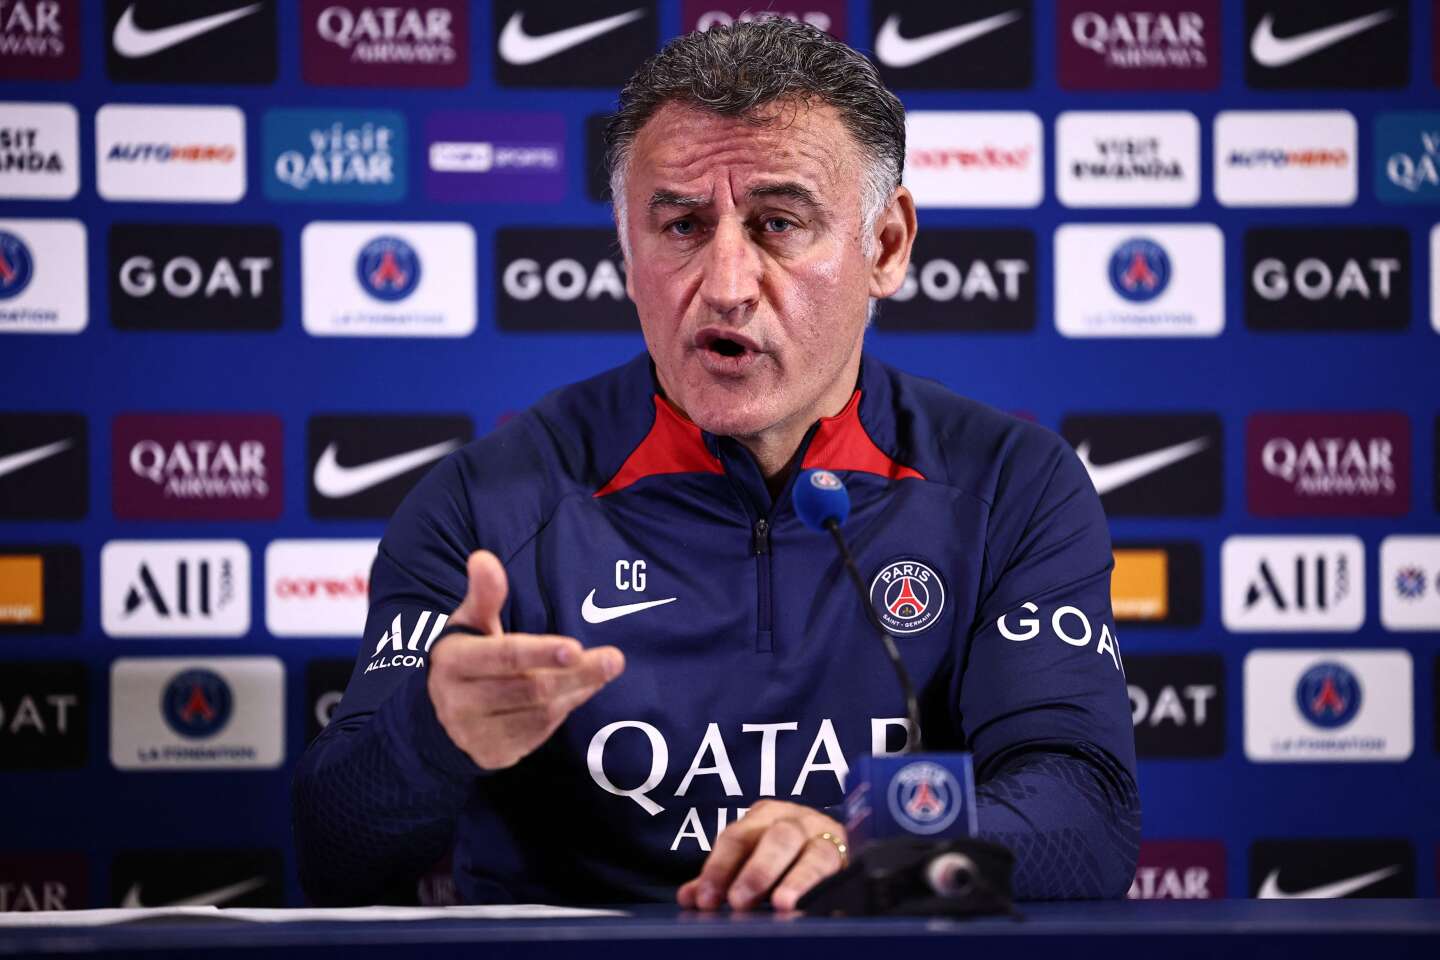 psg-coach-galtier-claims-to-be-deeply-shocked-by-racism-accusations